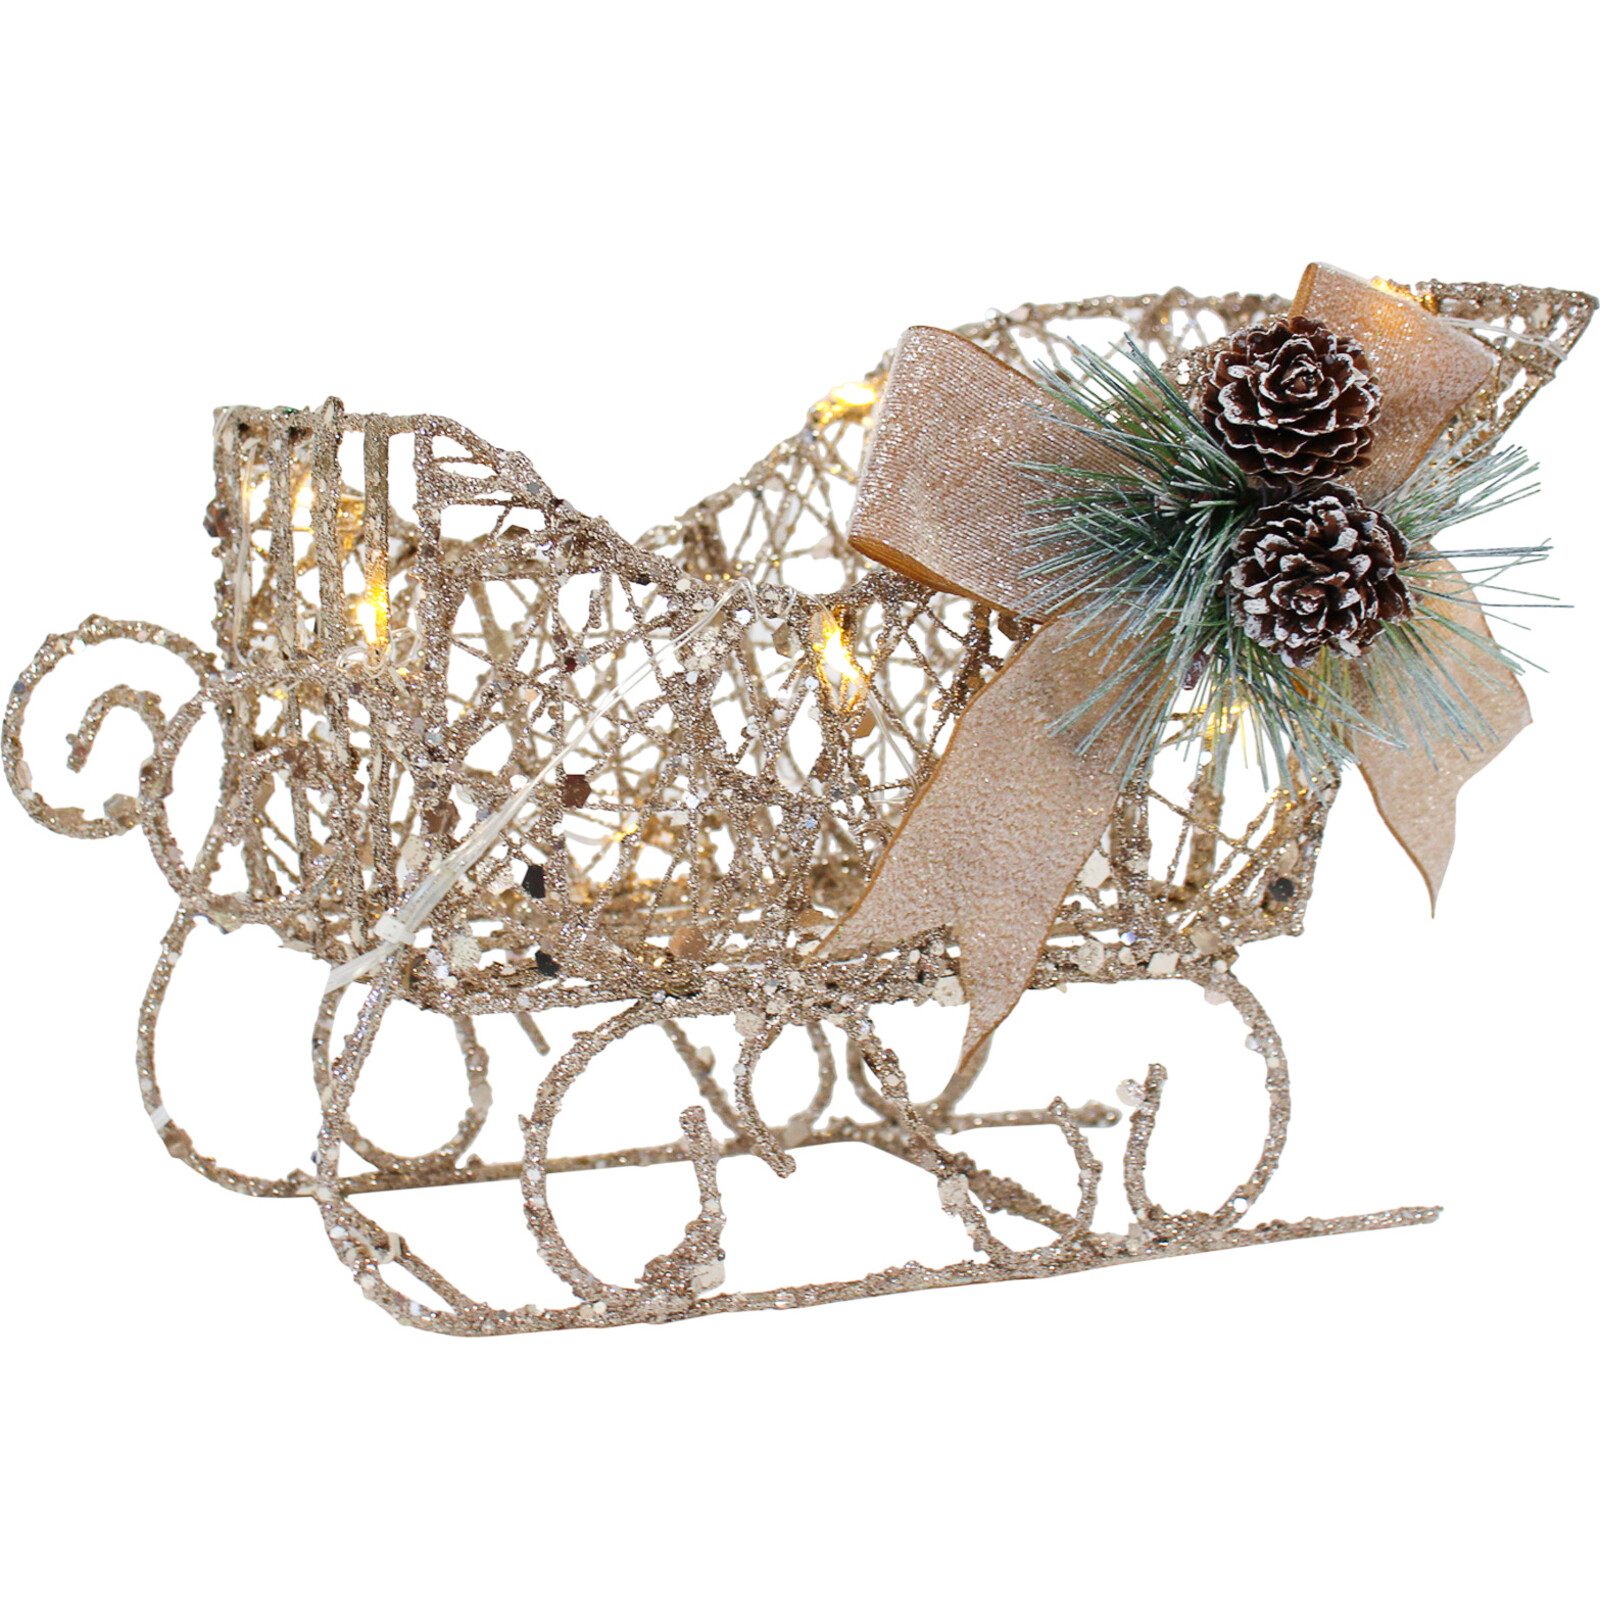 Gold Sleigh | Buy Wholesale Homewares And Giftware Online | LaVida Trading